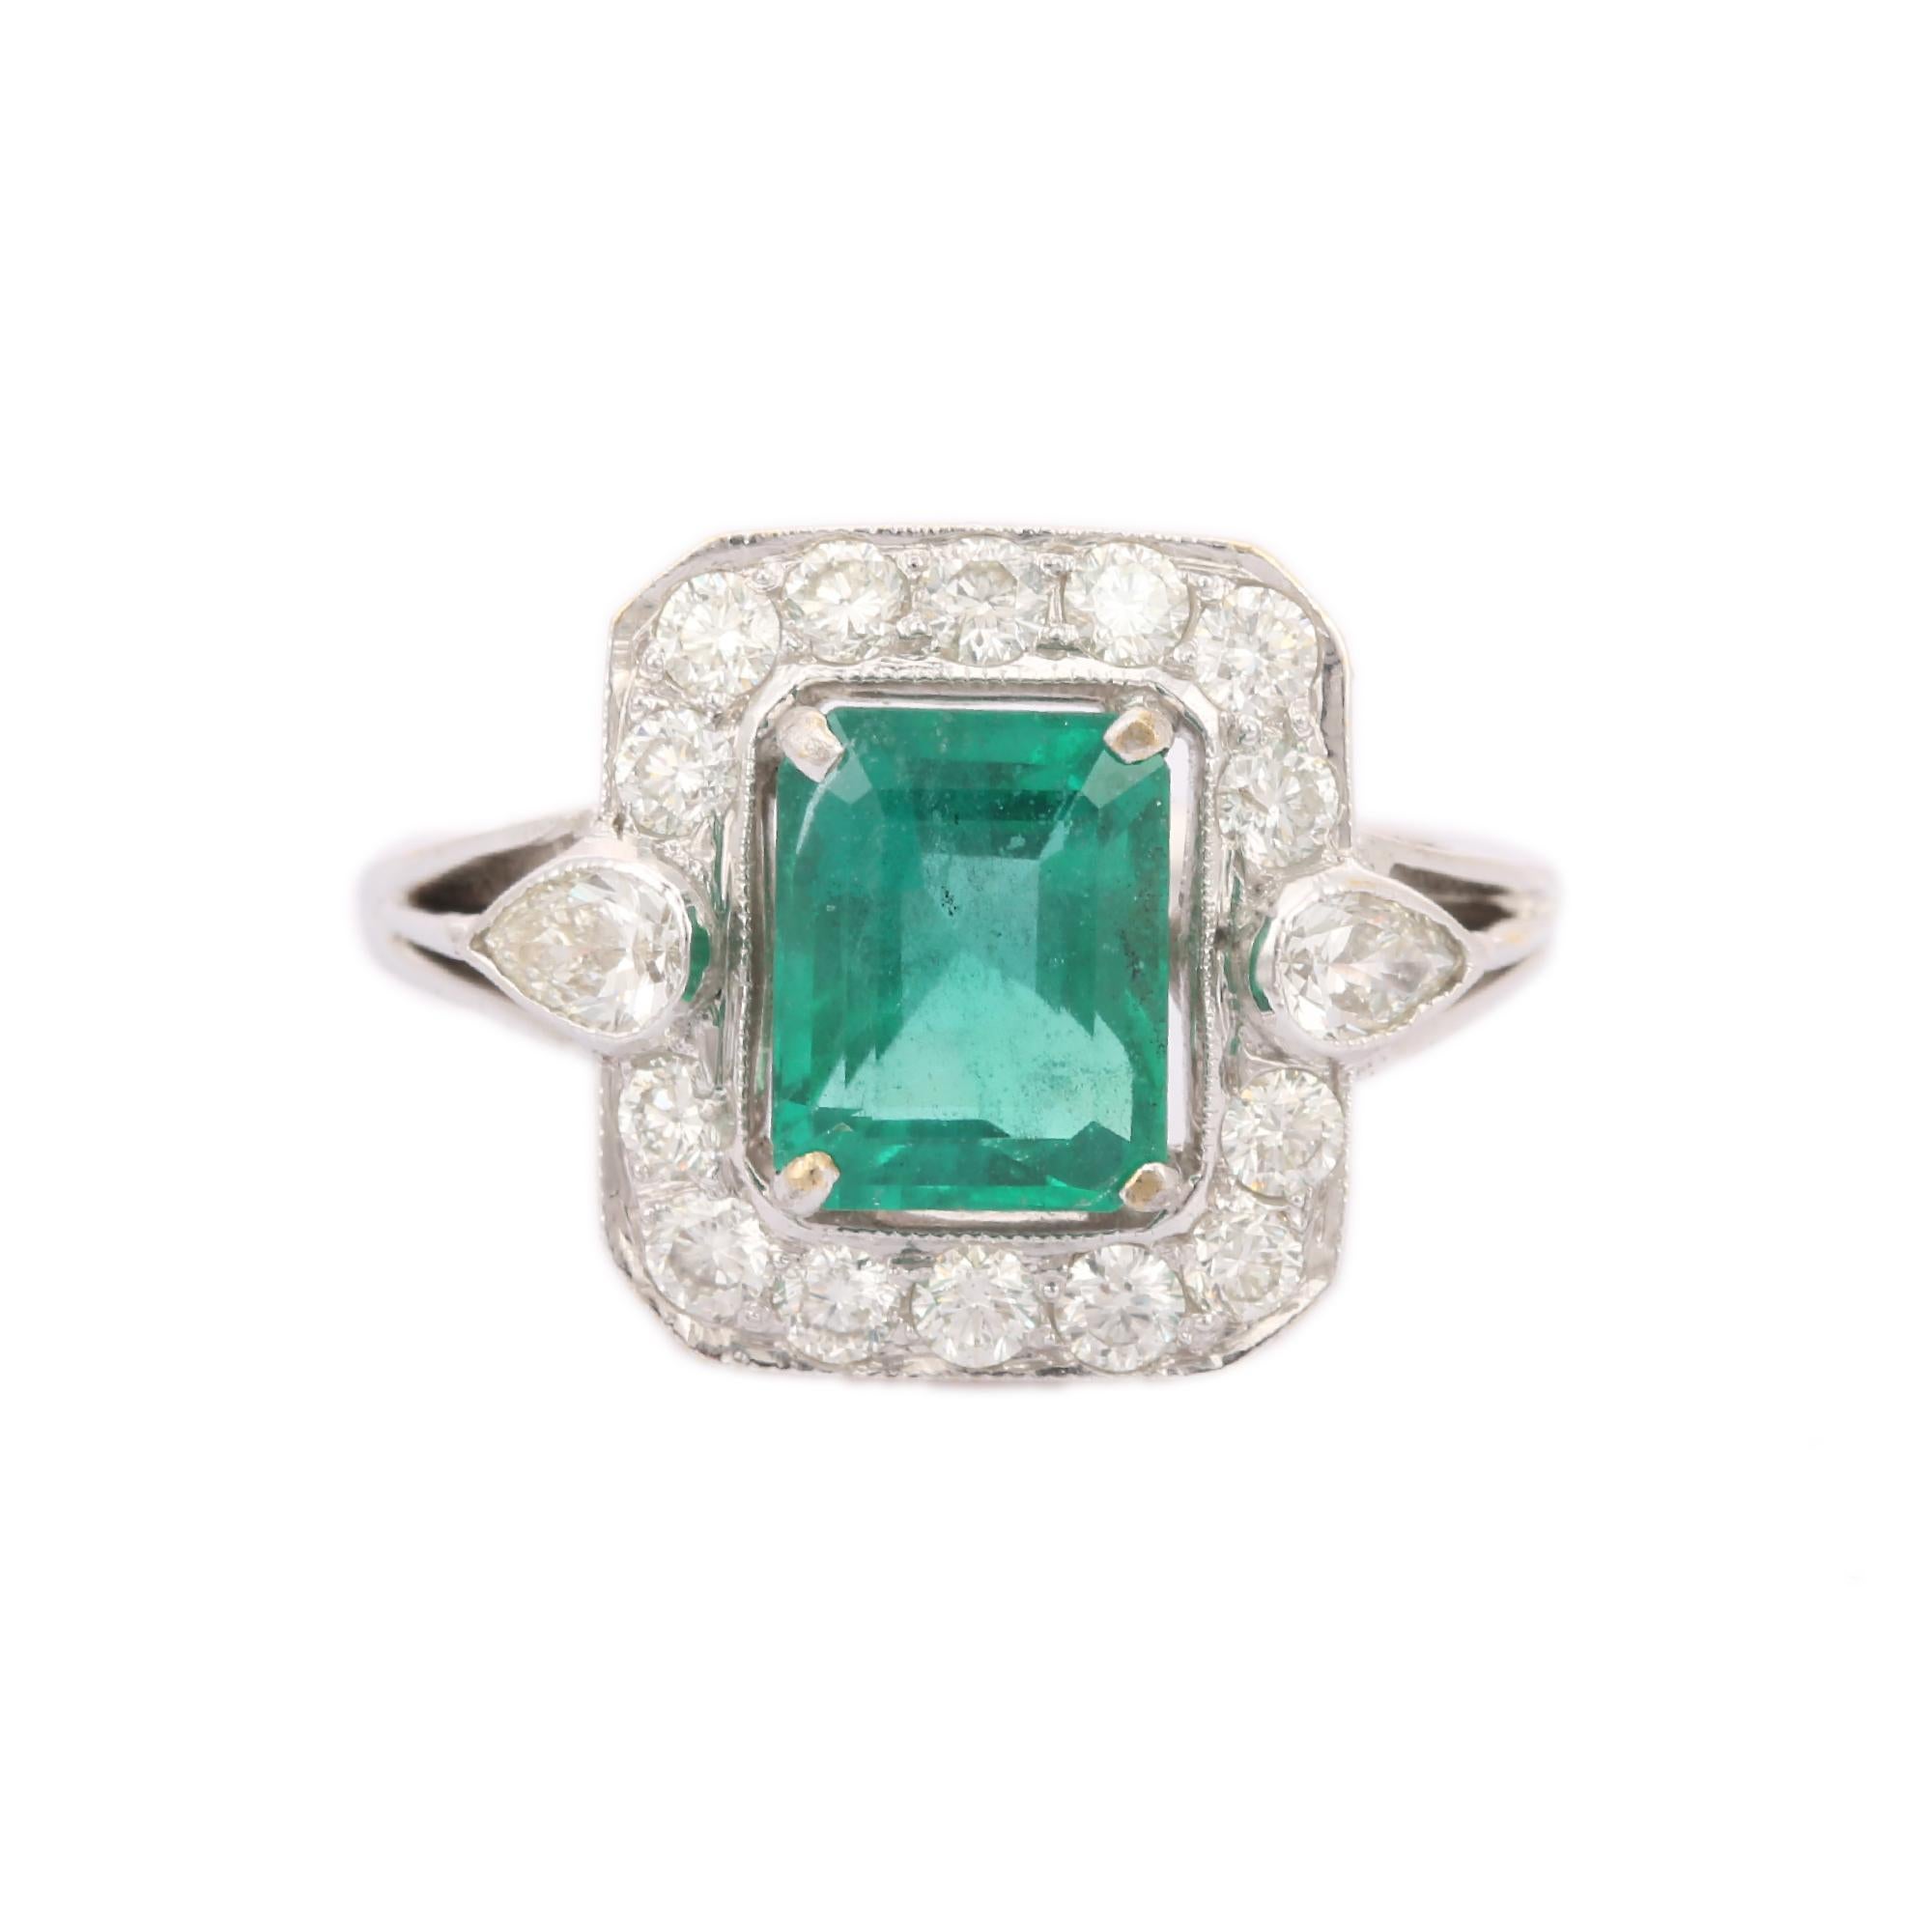 For Sale:  Exquisite 18kt Solid White Gold Emerald And Diamond Ring 2